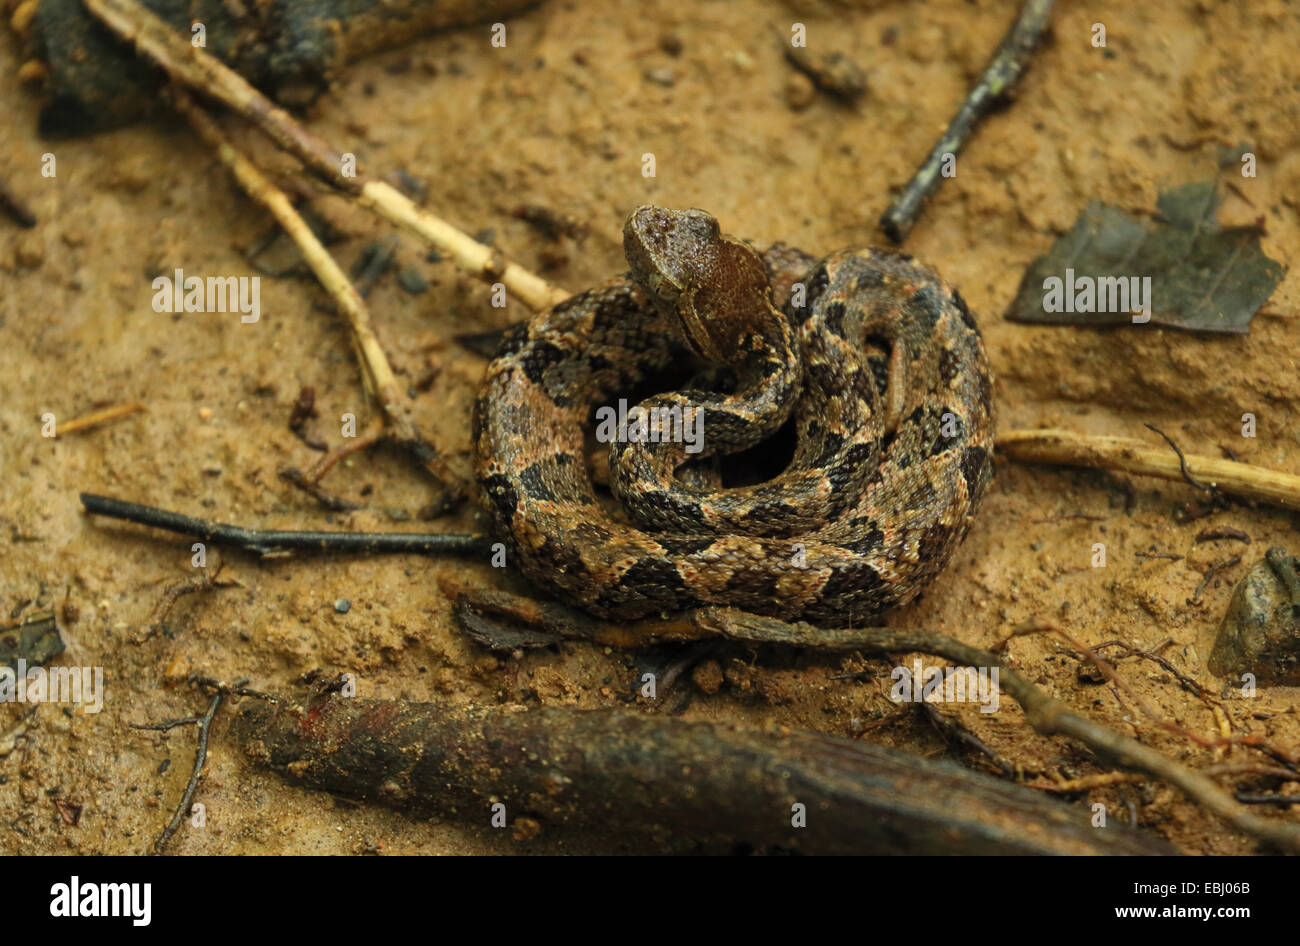 Fer-de-lance (Bothrops atrox), the most poisonous snakes in Costa Rica, coiled ready to strike. Corcovado National Park Stock Photo